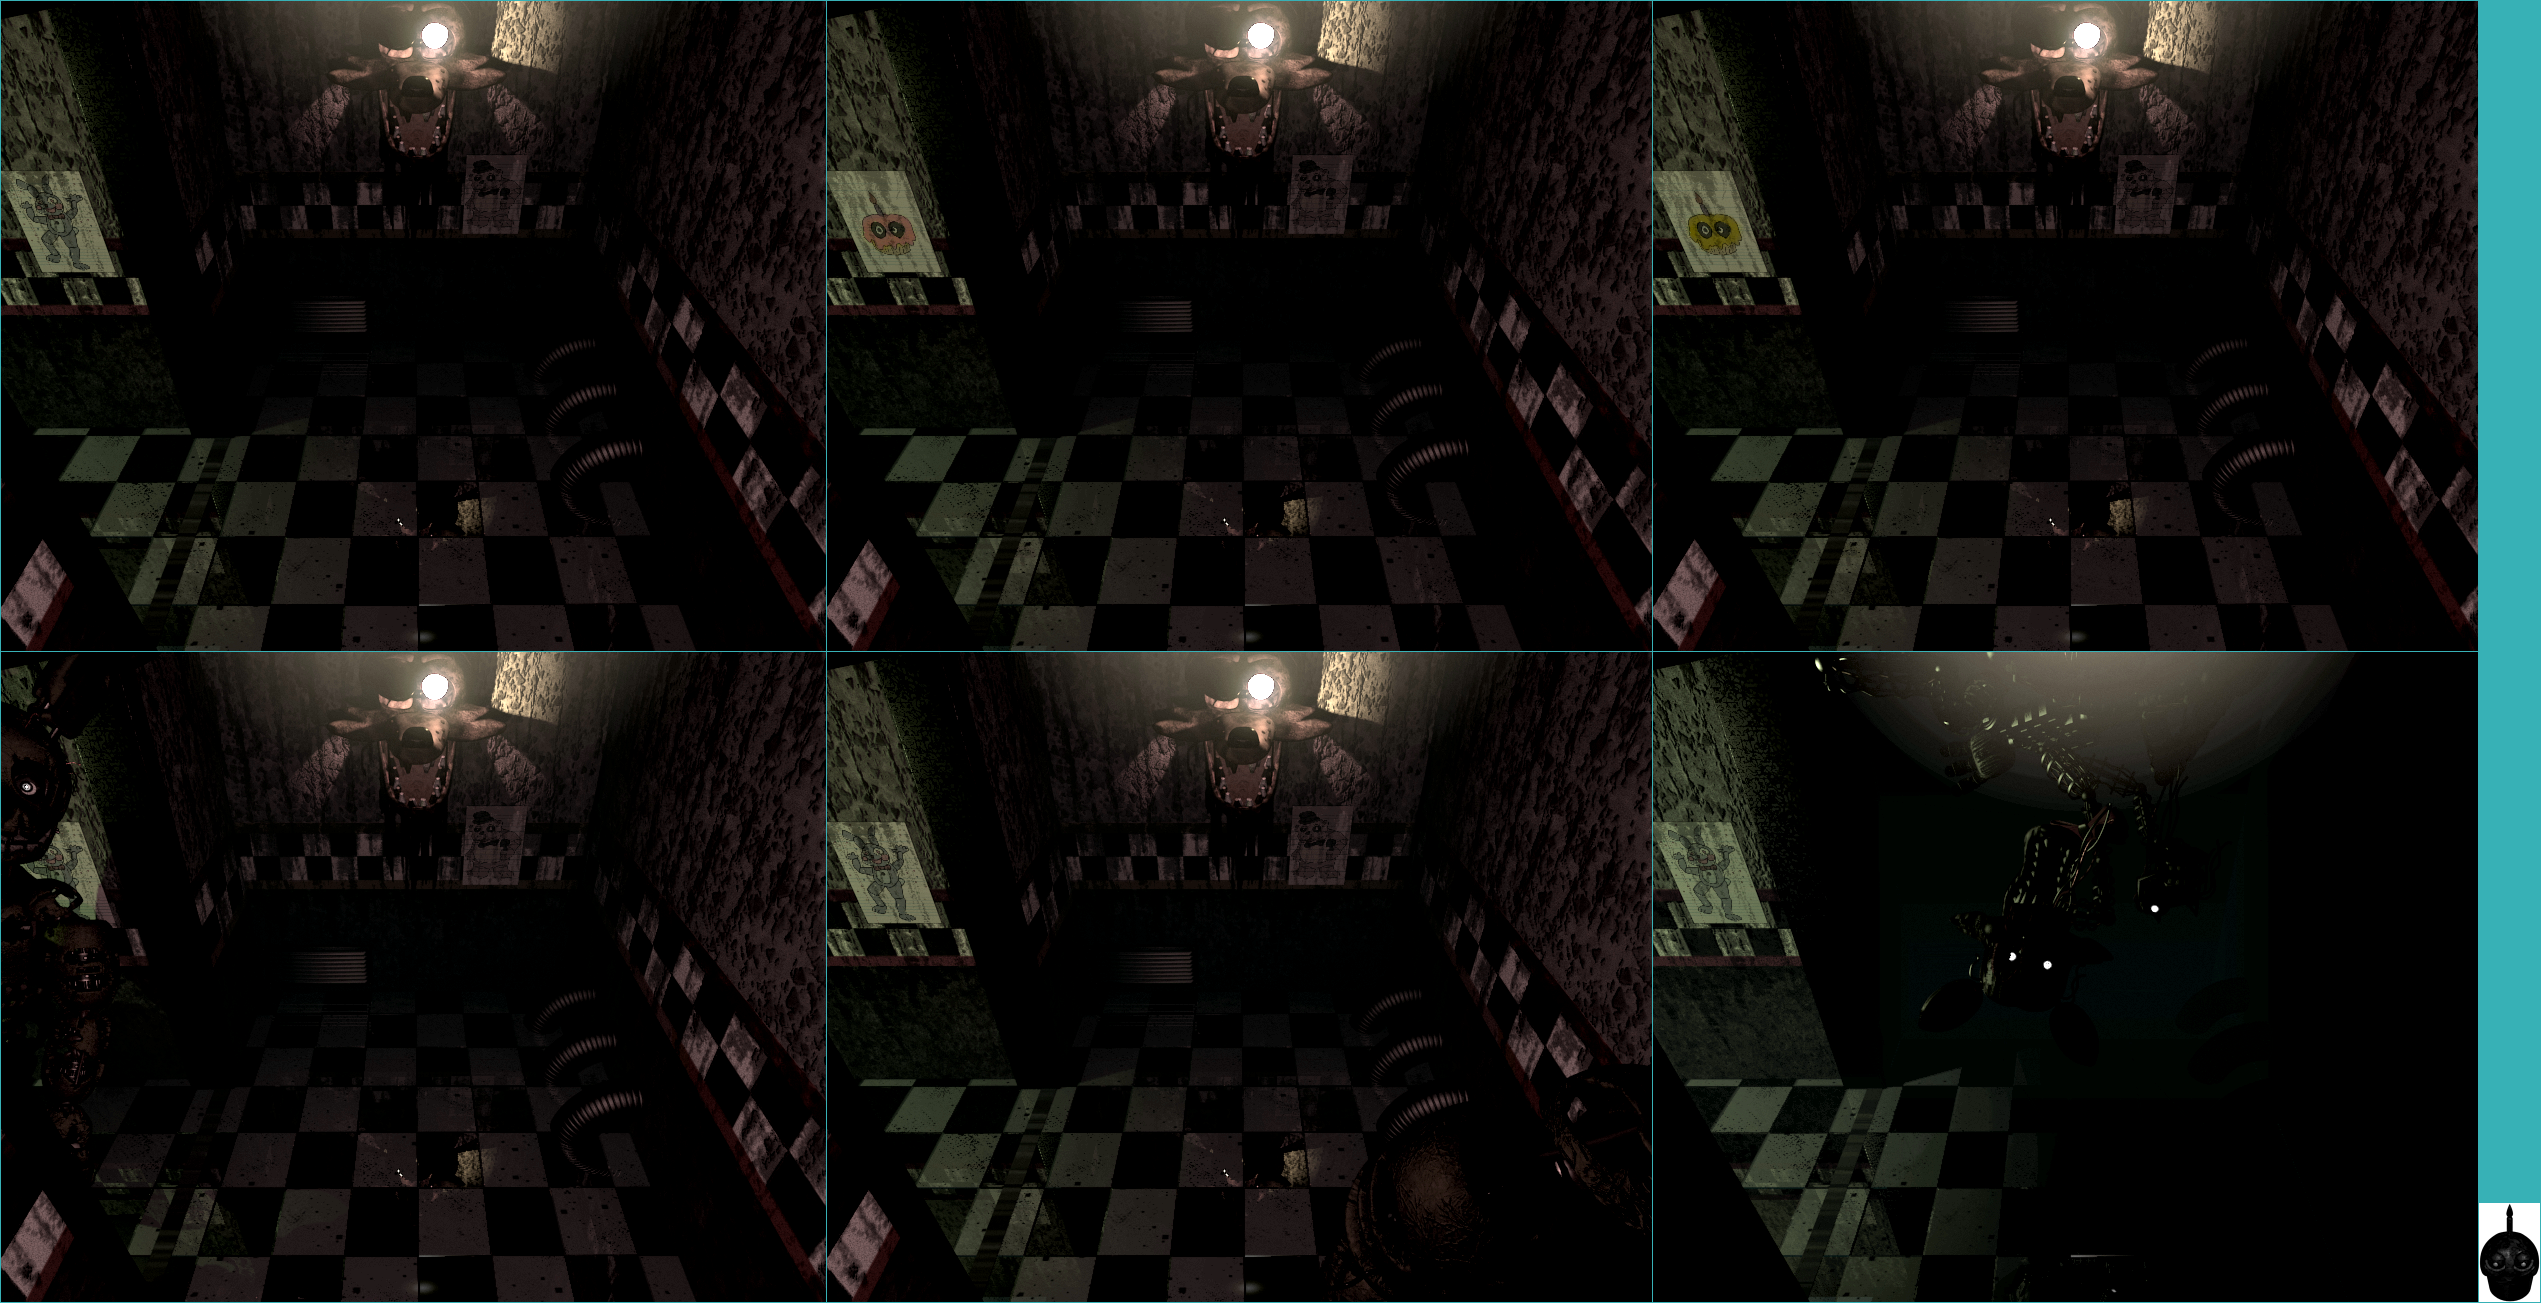 Five Nights at Freddy's 3 - Room 04